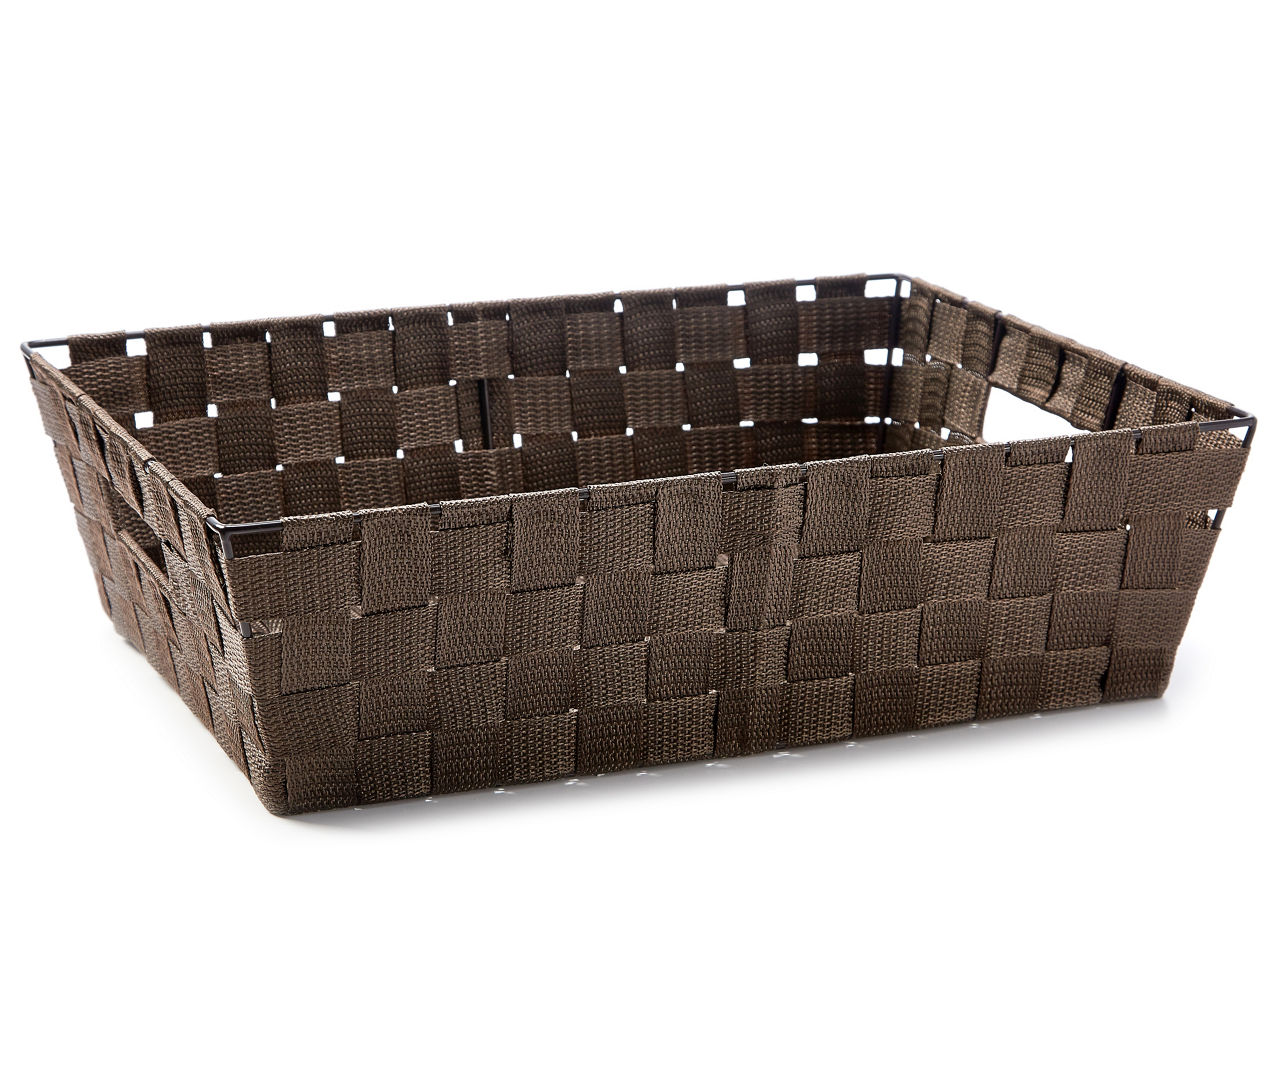 WOVEN PP STRAP TOTE - BROWN - TRAY